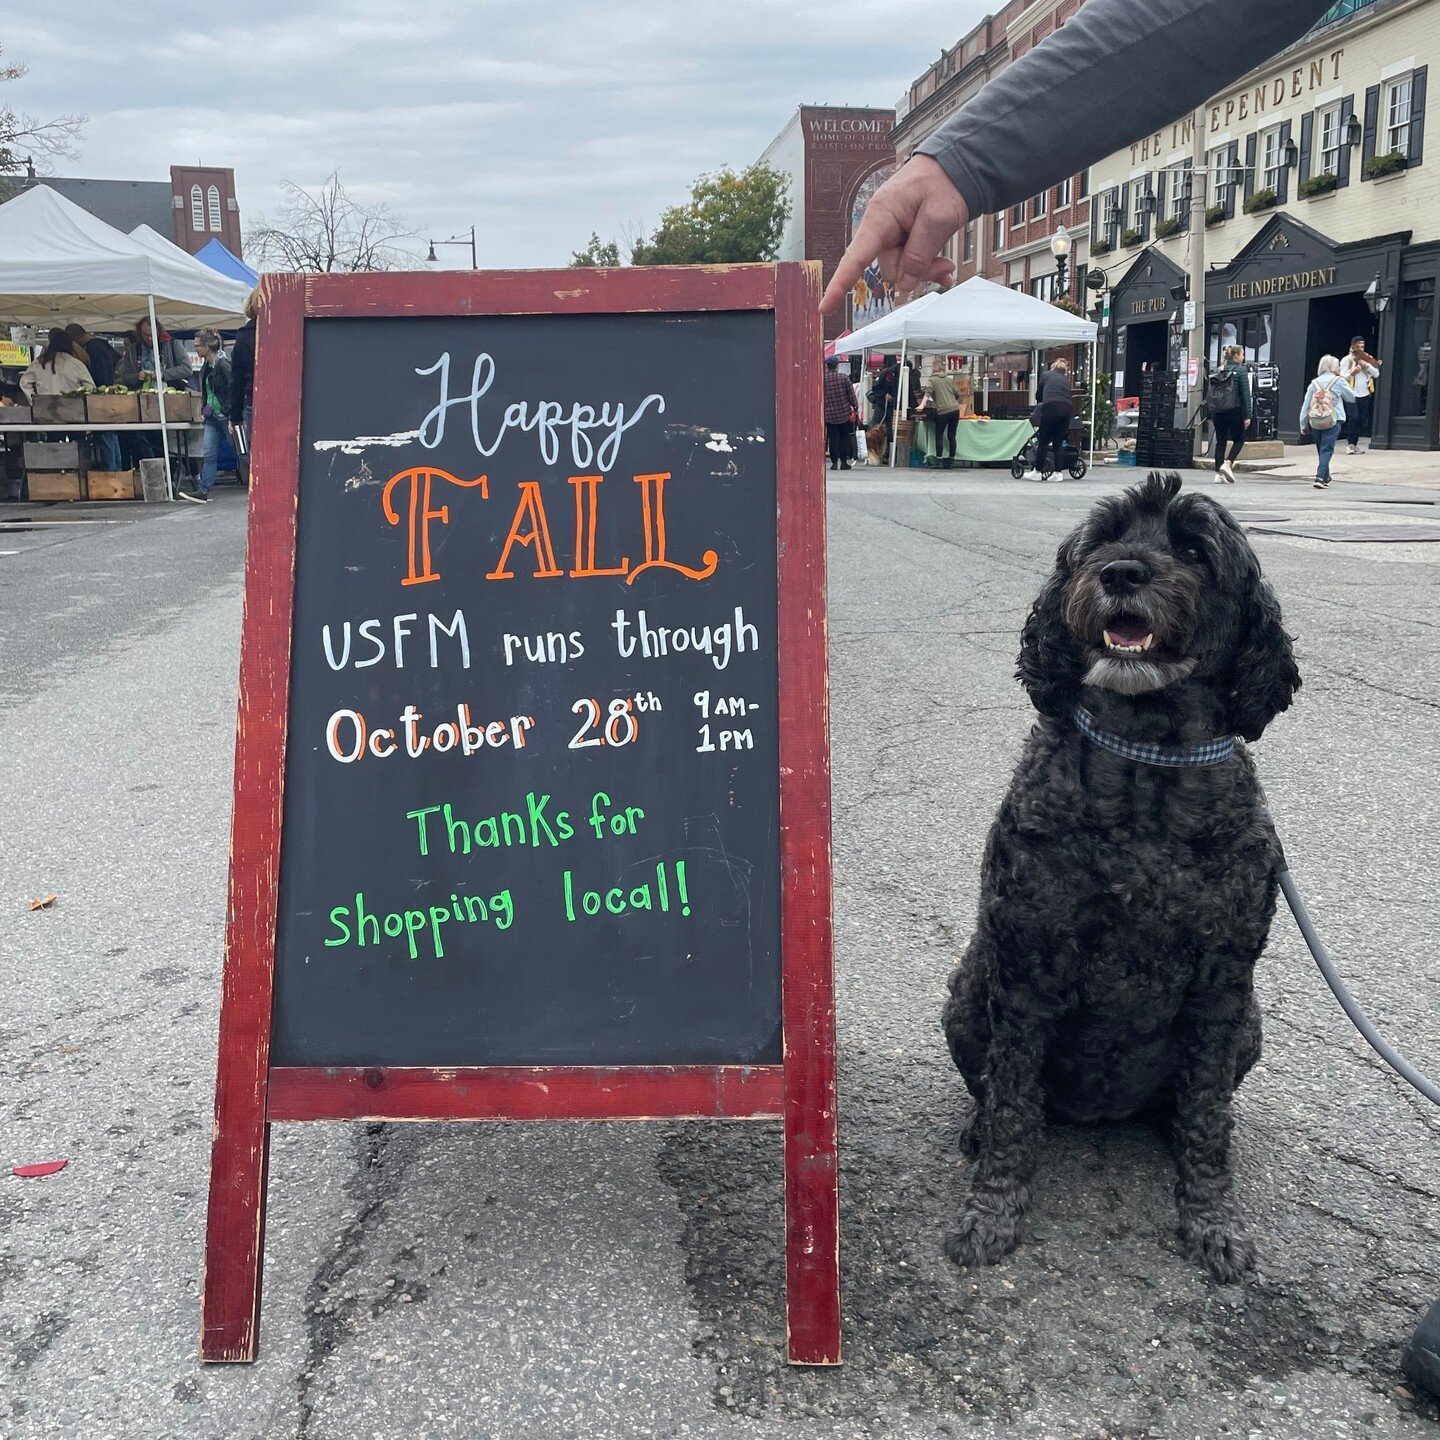 🐶💕MARKET PUP APPRECIATION💕🐶

With the dog days of summer behind us, take a look back at some of the four-legged shoppers spotted at the market this season 🔎🐕

We love seeing your well-behaved pups sniffing around the market each week ✨ and can'